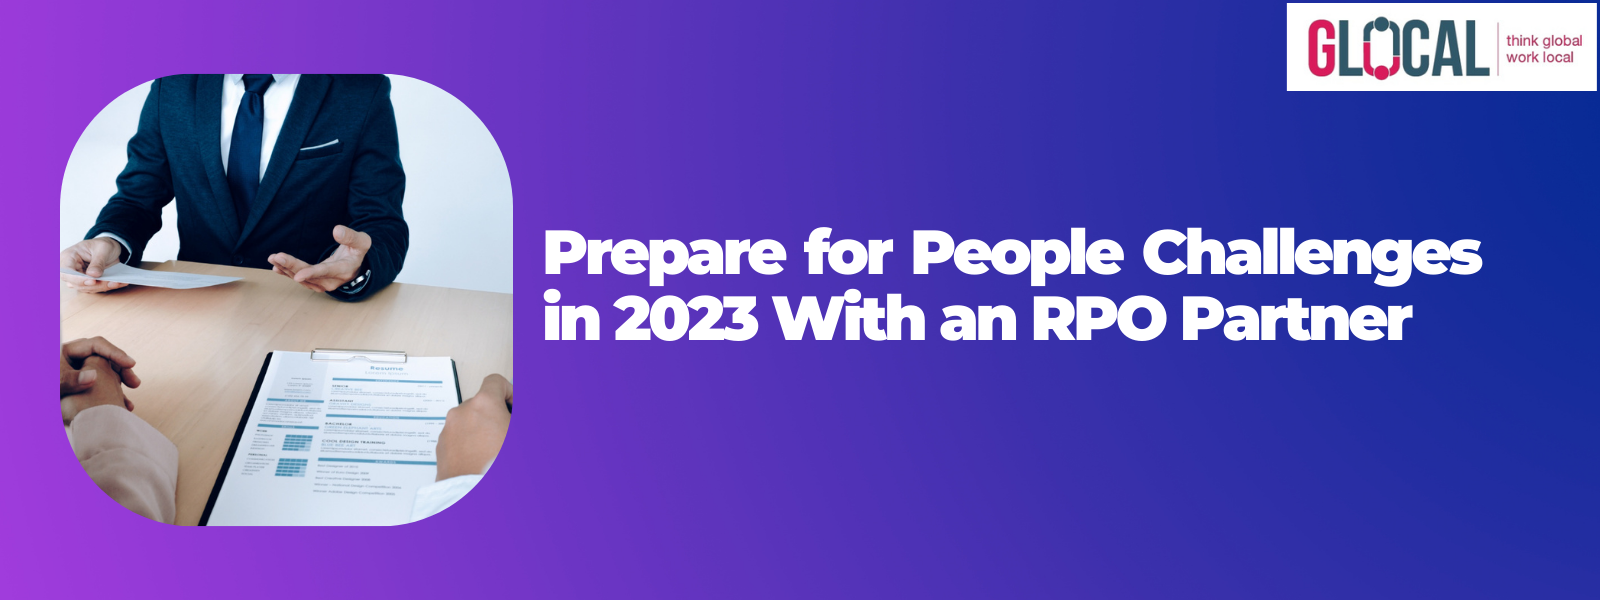 Prepare for People Challenges in 2023 With an RPO Partner